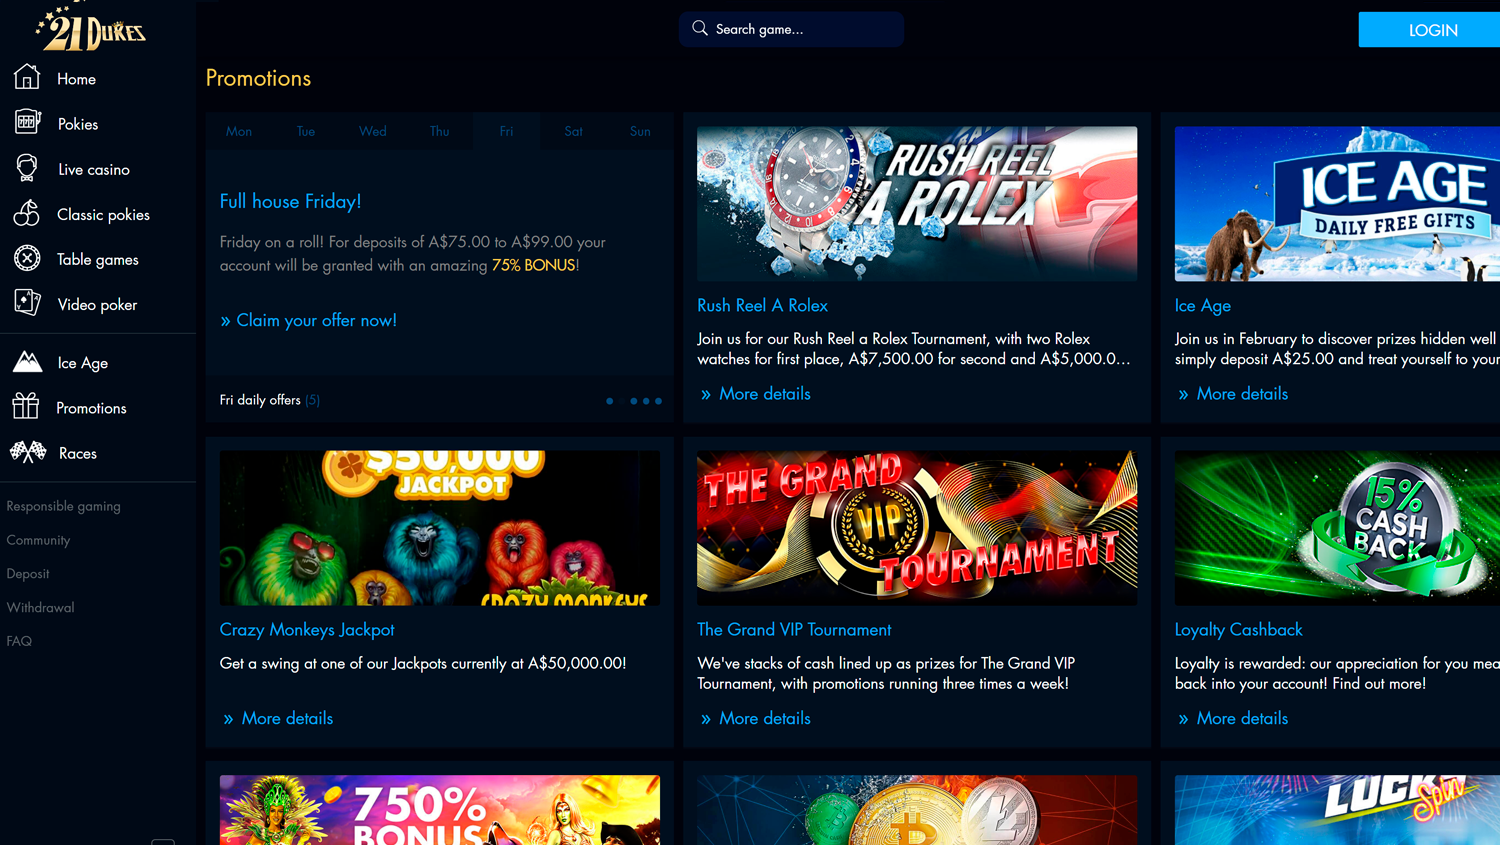 Promotions page of the 21Dukes casino site